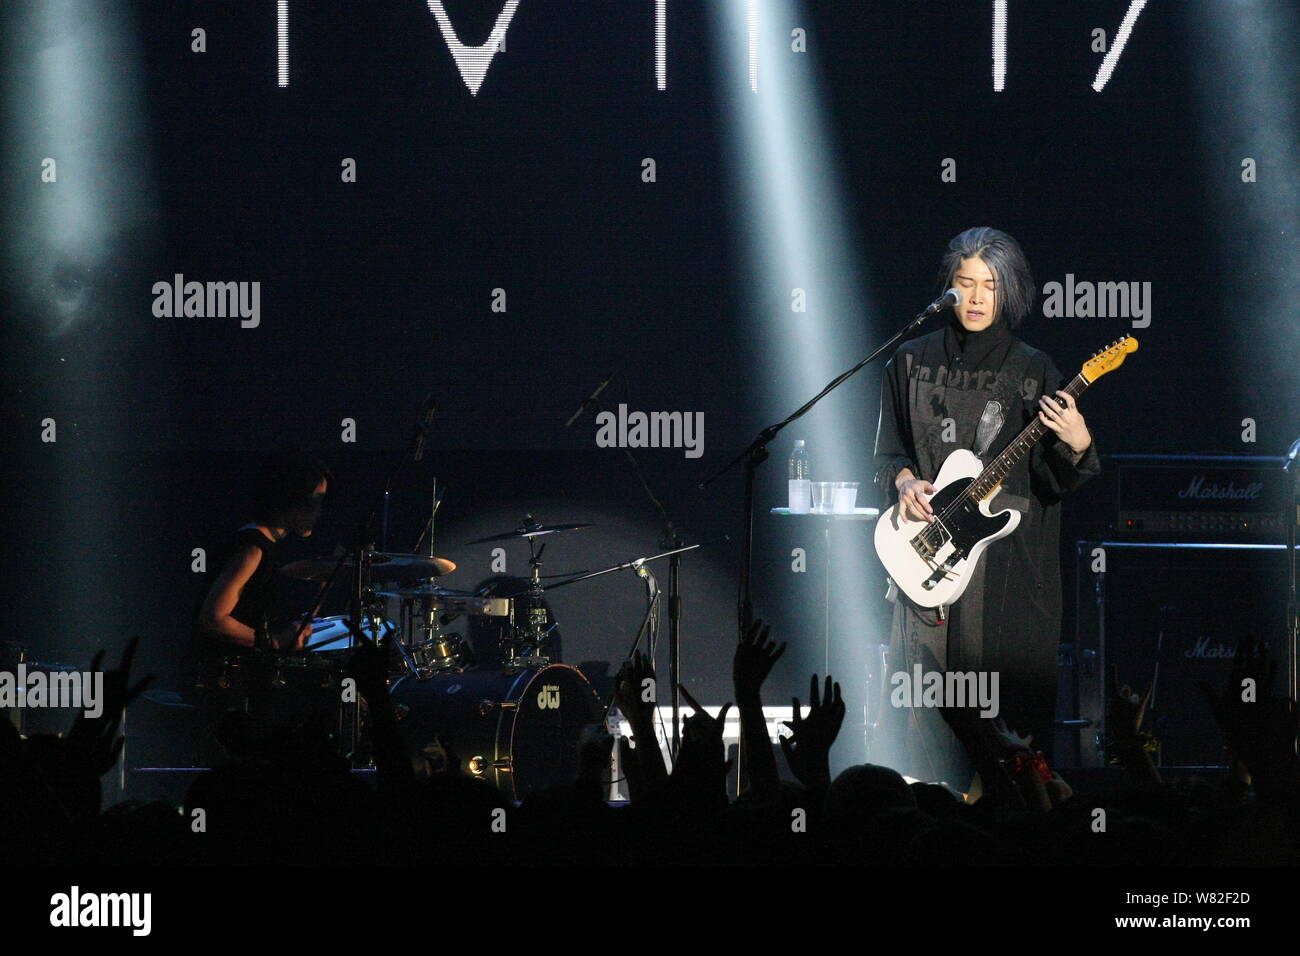 Japanese singer and actor Takamasa Ishihara, better known by his stage name Miyavi, performs during a concert in Taipei, Taiwan, 26 February 2017. Stock Photo